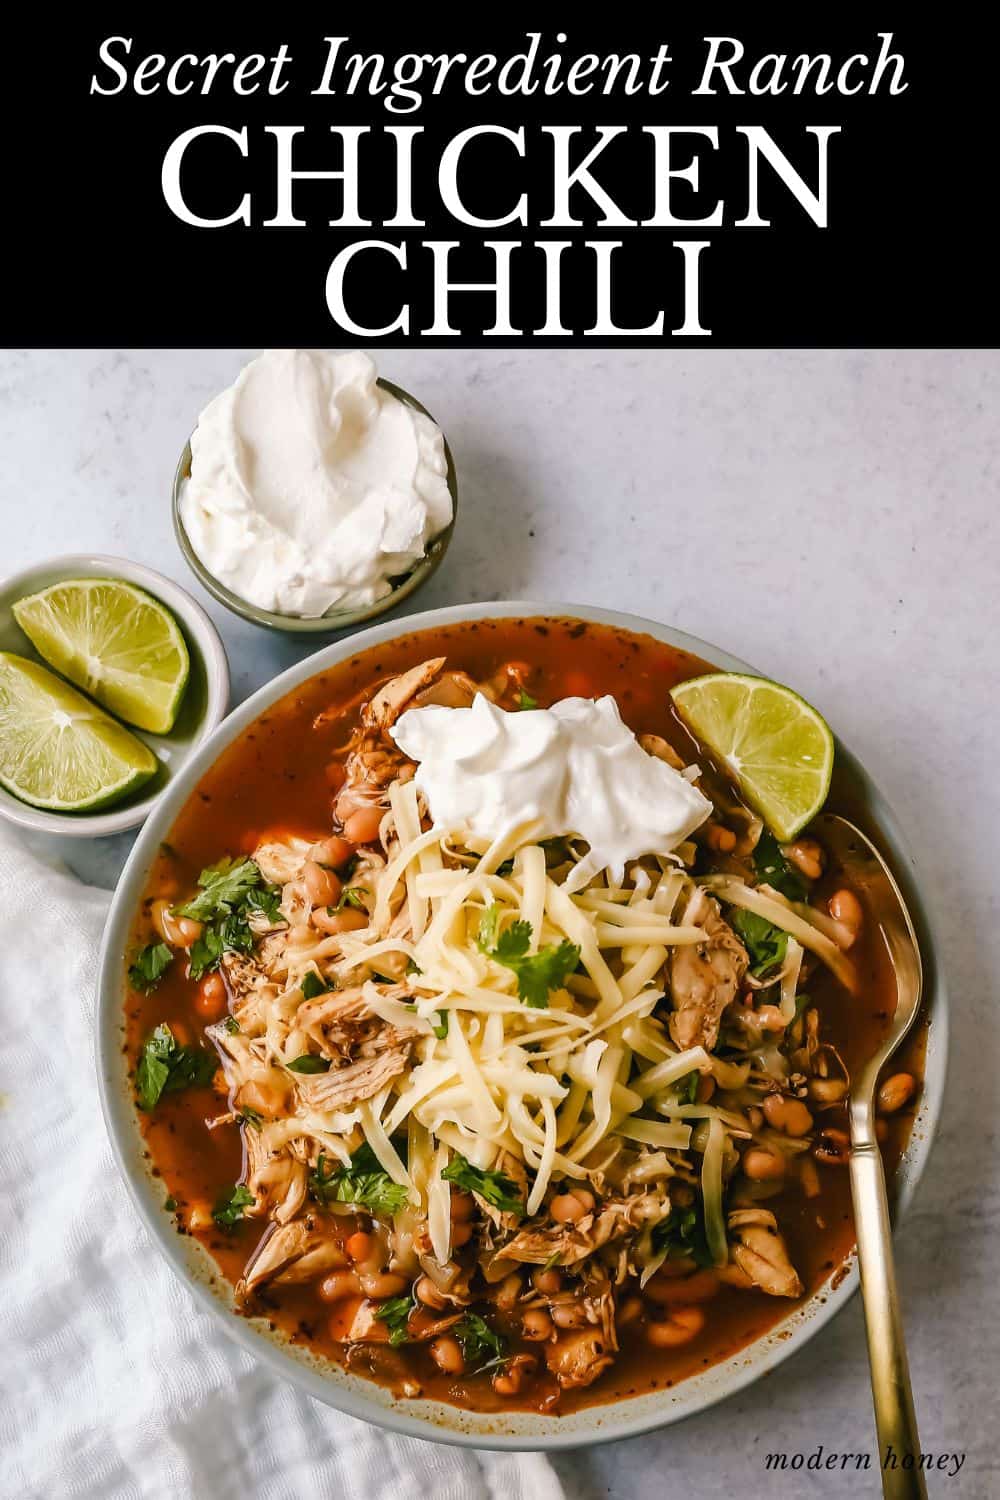 This quick and easy chicken chili is made in less than 30 minutes and filled with protein, good fats, and healthy carbs! This White Chicken Chili is a quick and easy soup recipe made with shredded chicken, onion, garlic, chili powder, green chilies, white beans, and ranch powder, and topped with cheese and sour cream.